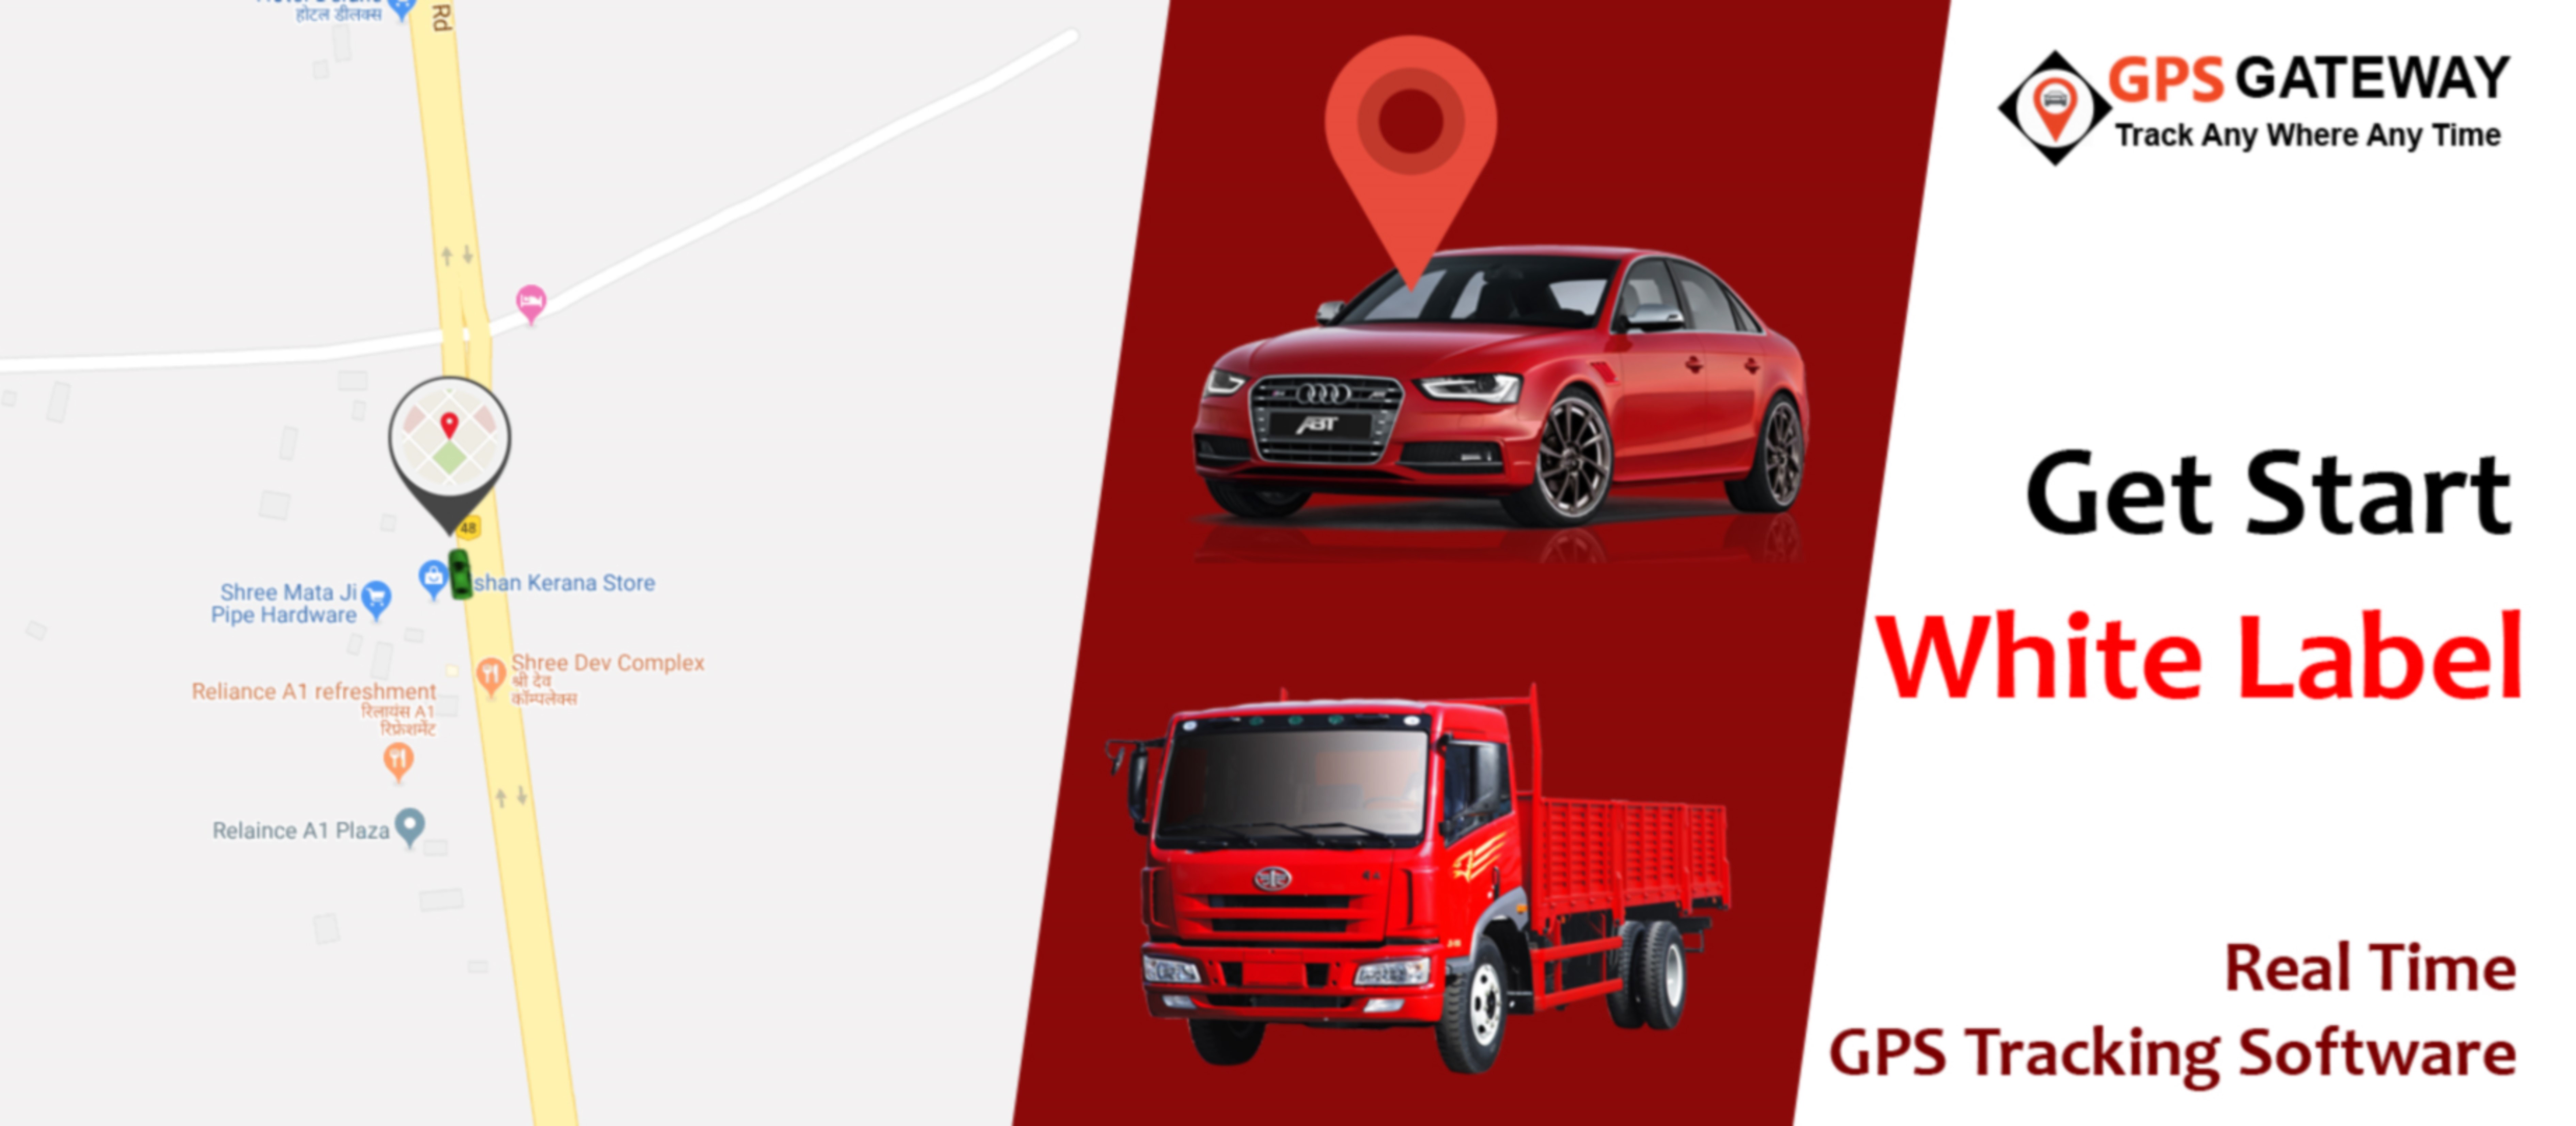 sales Staff Vehicle Tracking software, pharma mr location tracking, vehicle gps tracker, field force Vehicle Tracking device